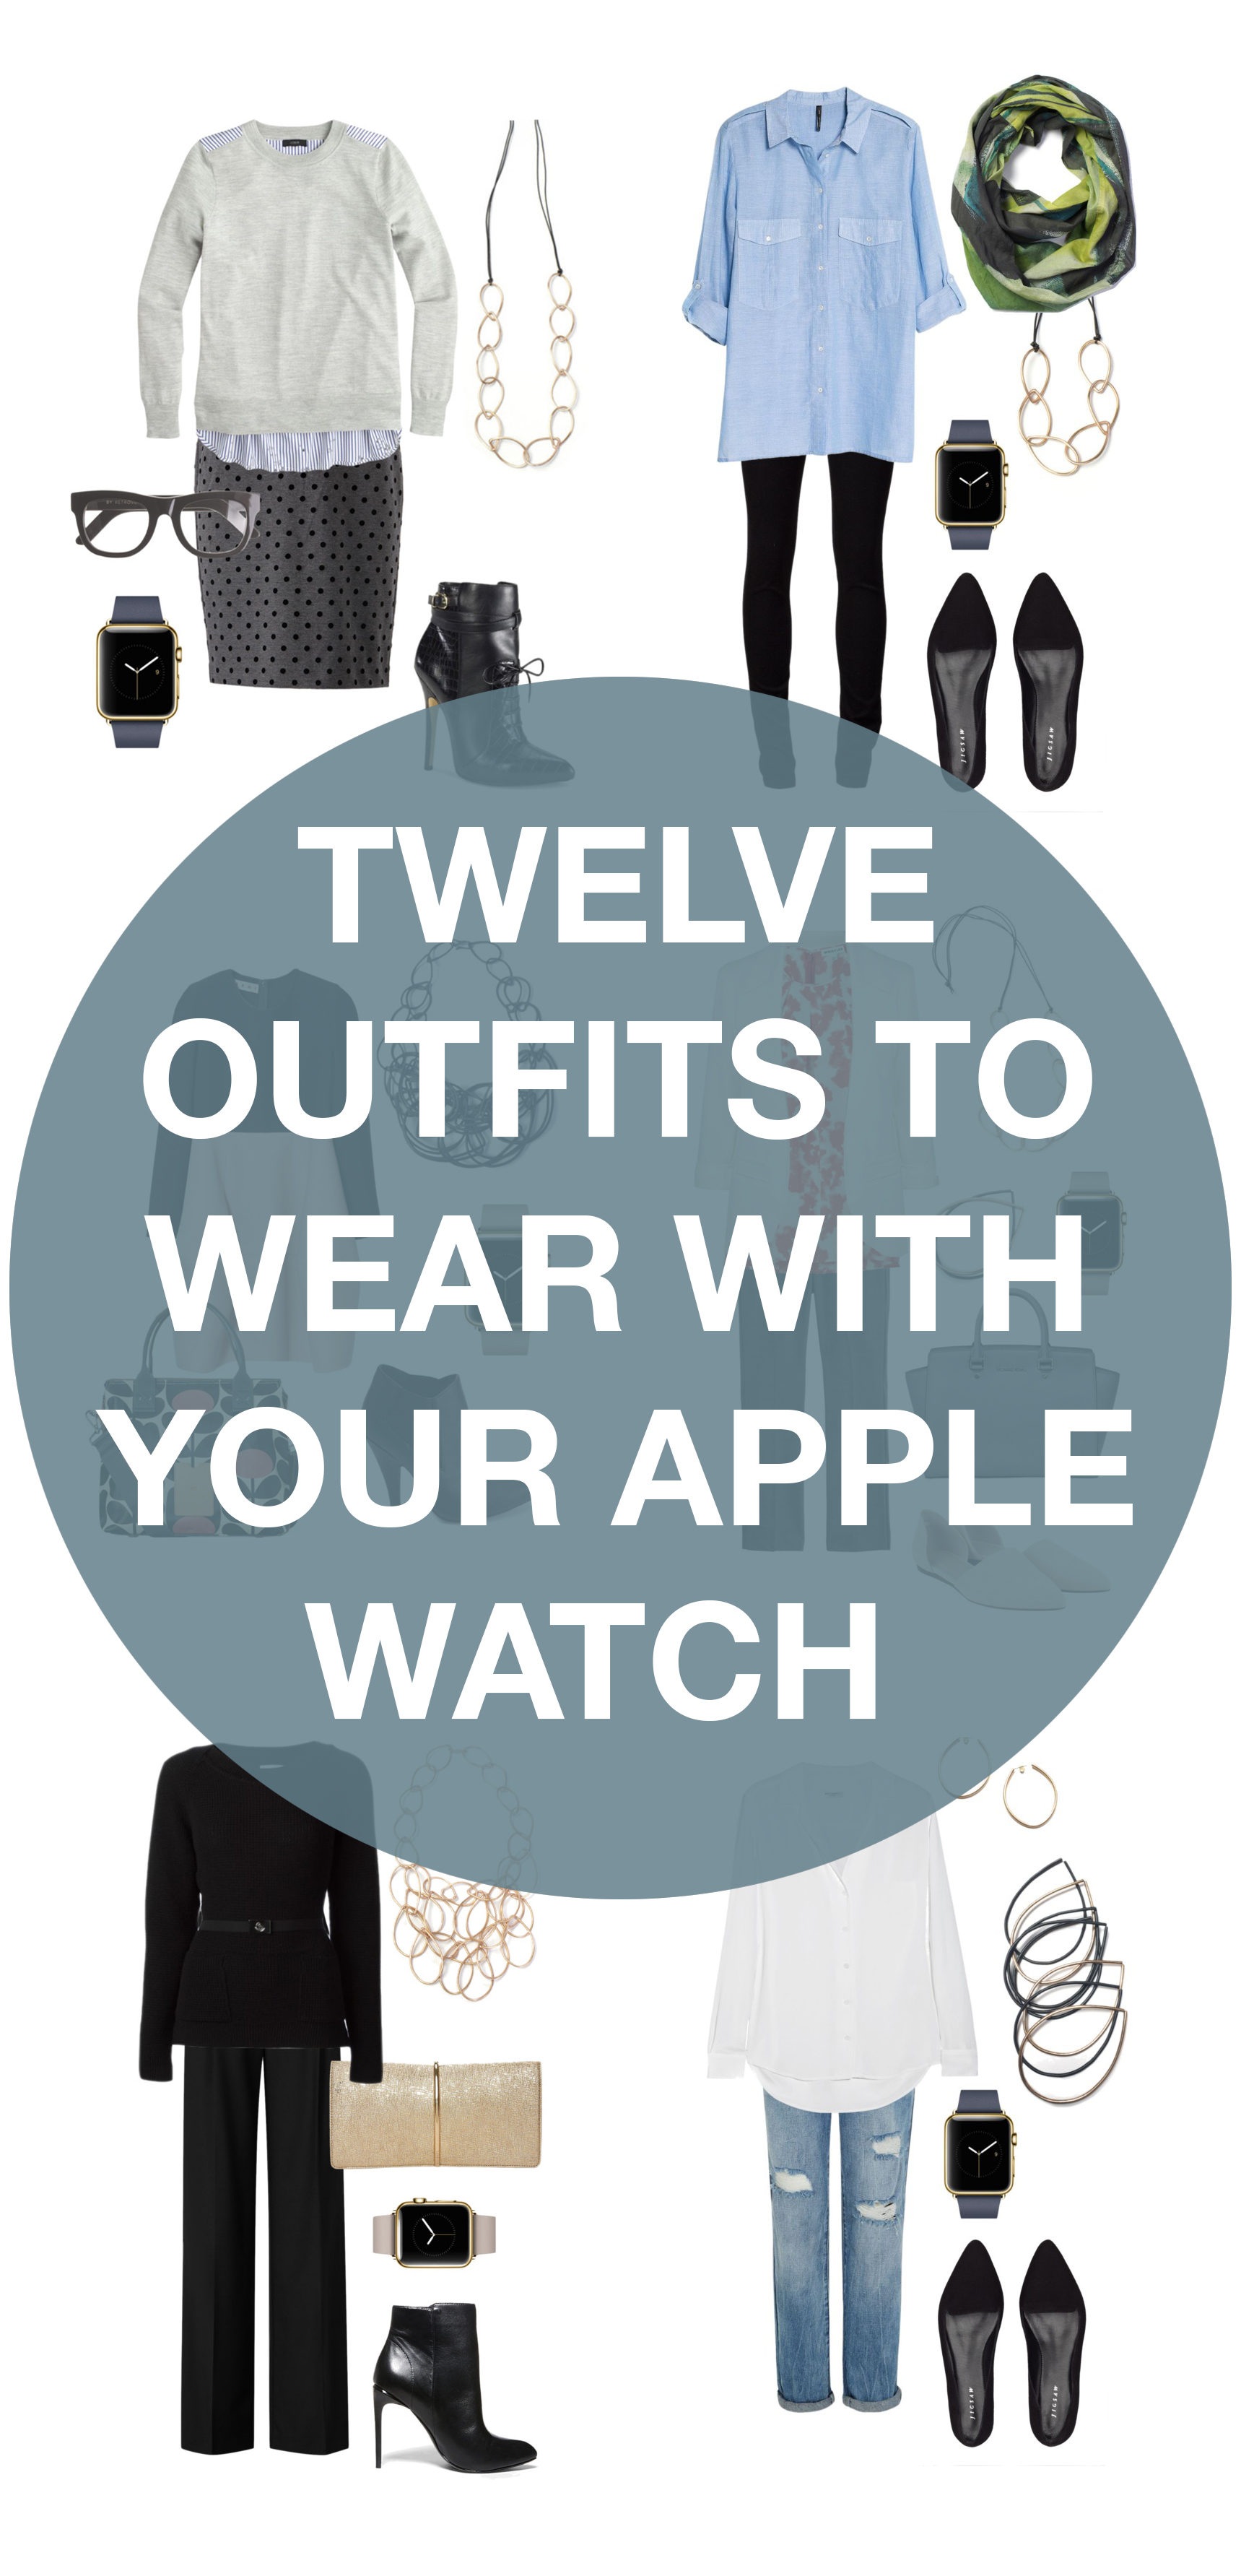 twelve outfit ideas to wear with the apple watch // click for outfit details